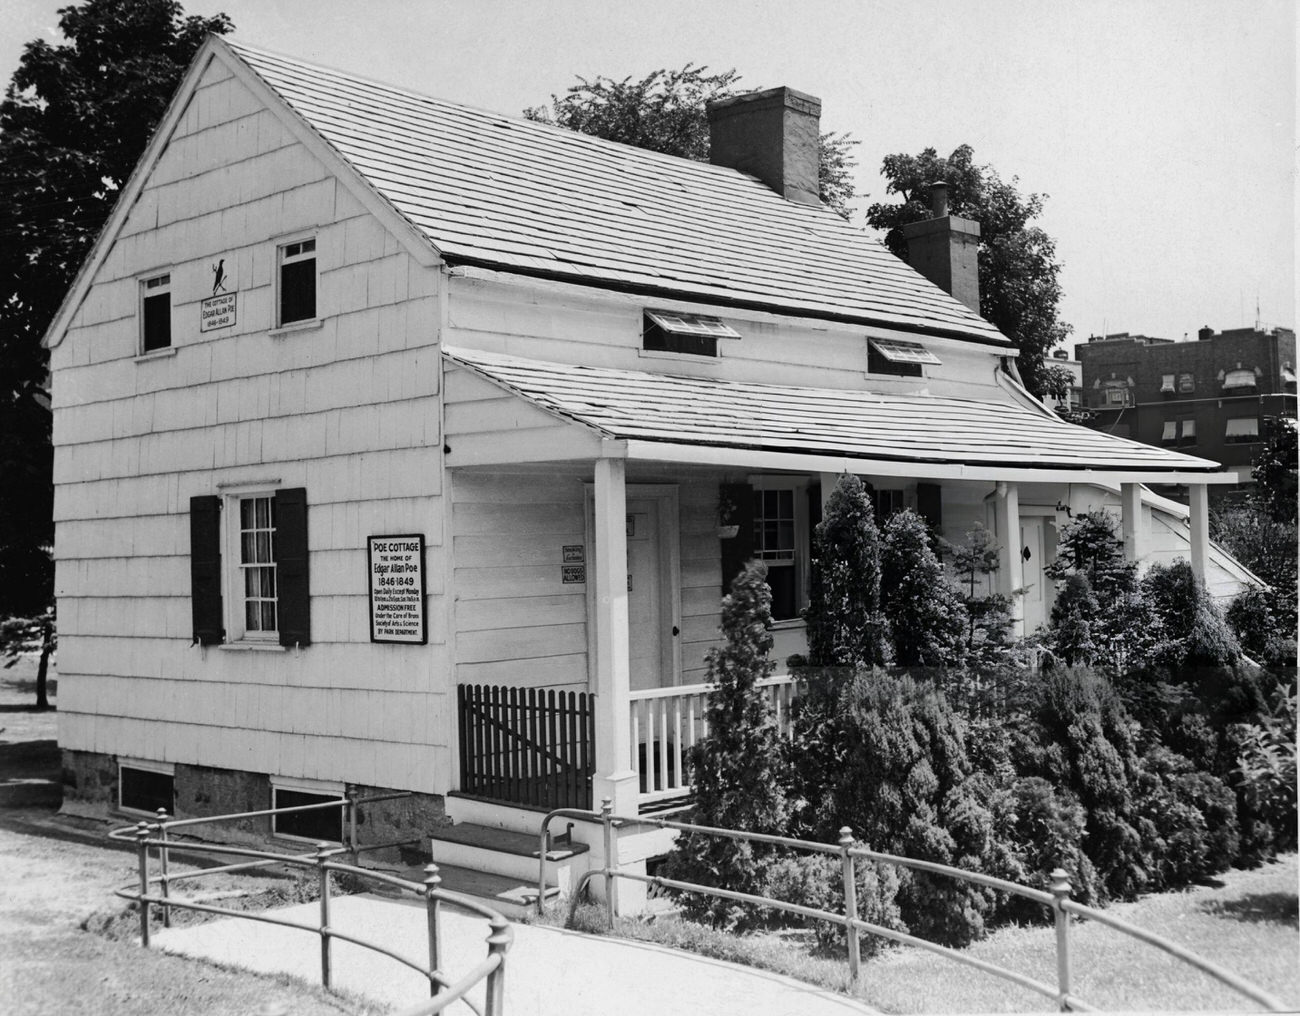 View Of The Edgar Allan Poe Cottage In The Bronx, Where Poe Lived From 1846 To 1849, Circa 1949.